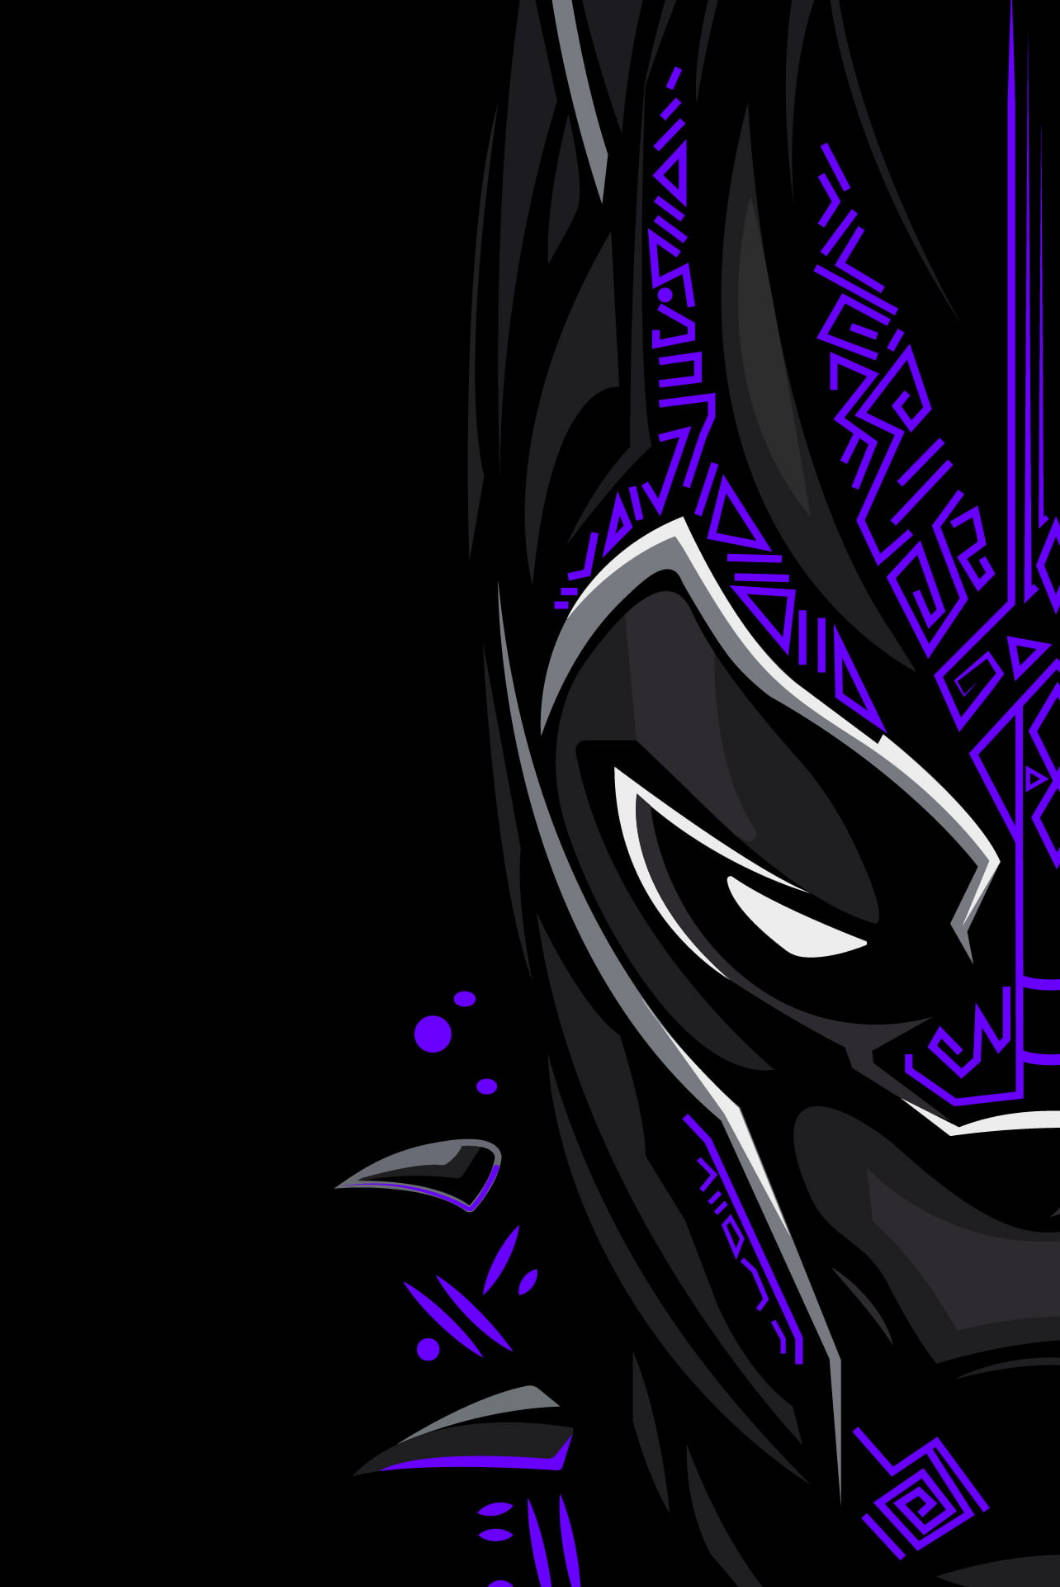 Download Black Panther Iphone 4s Wallpaper 